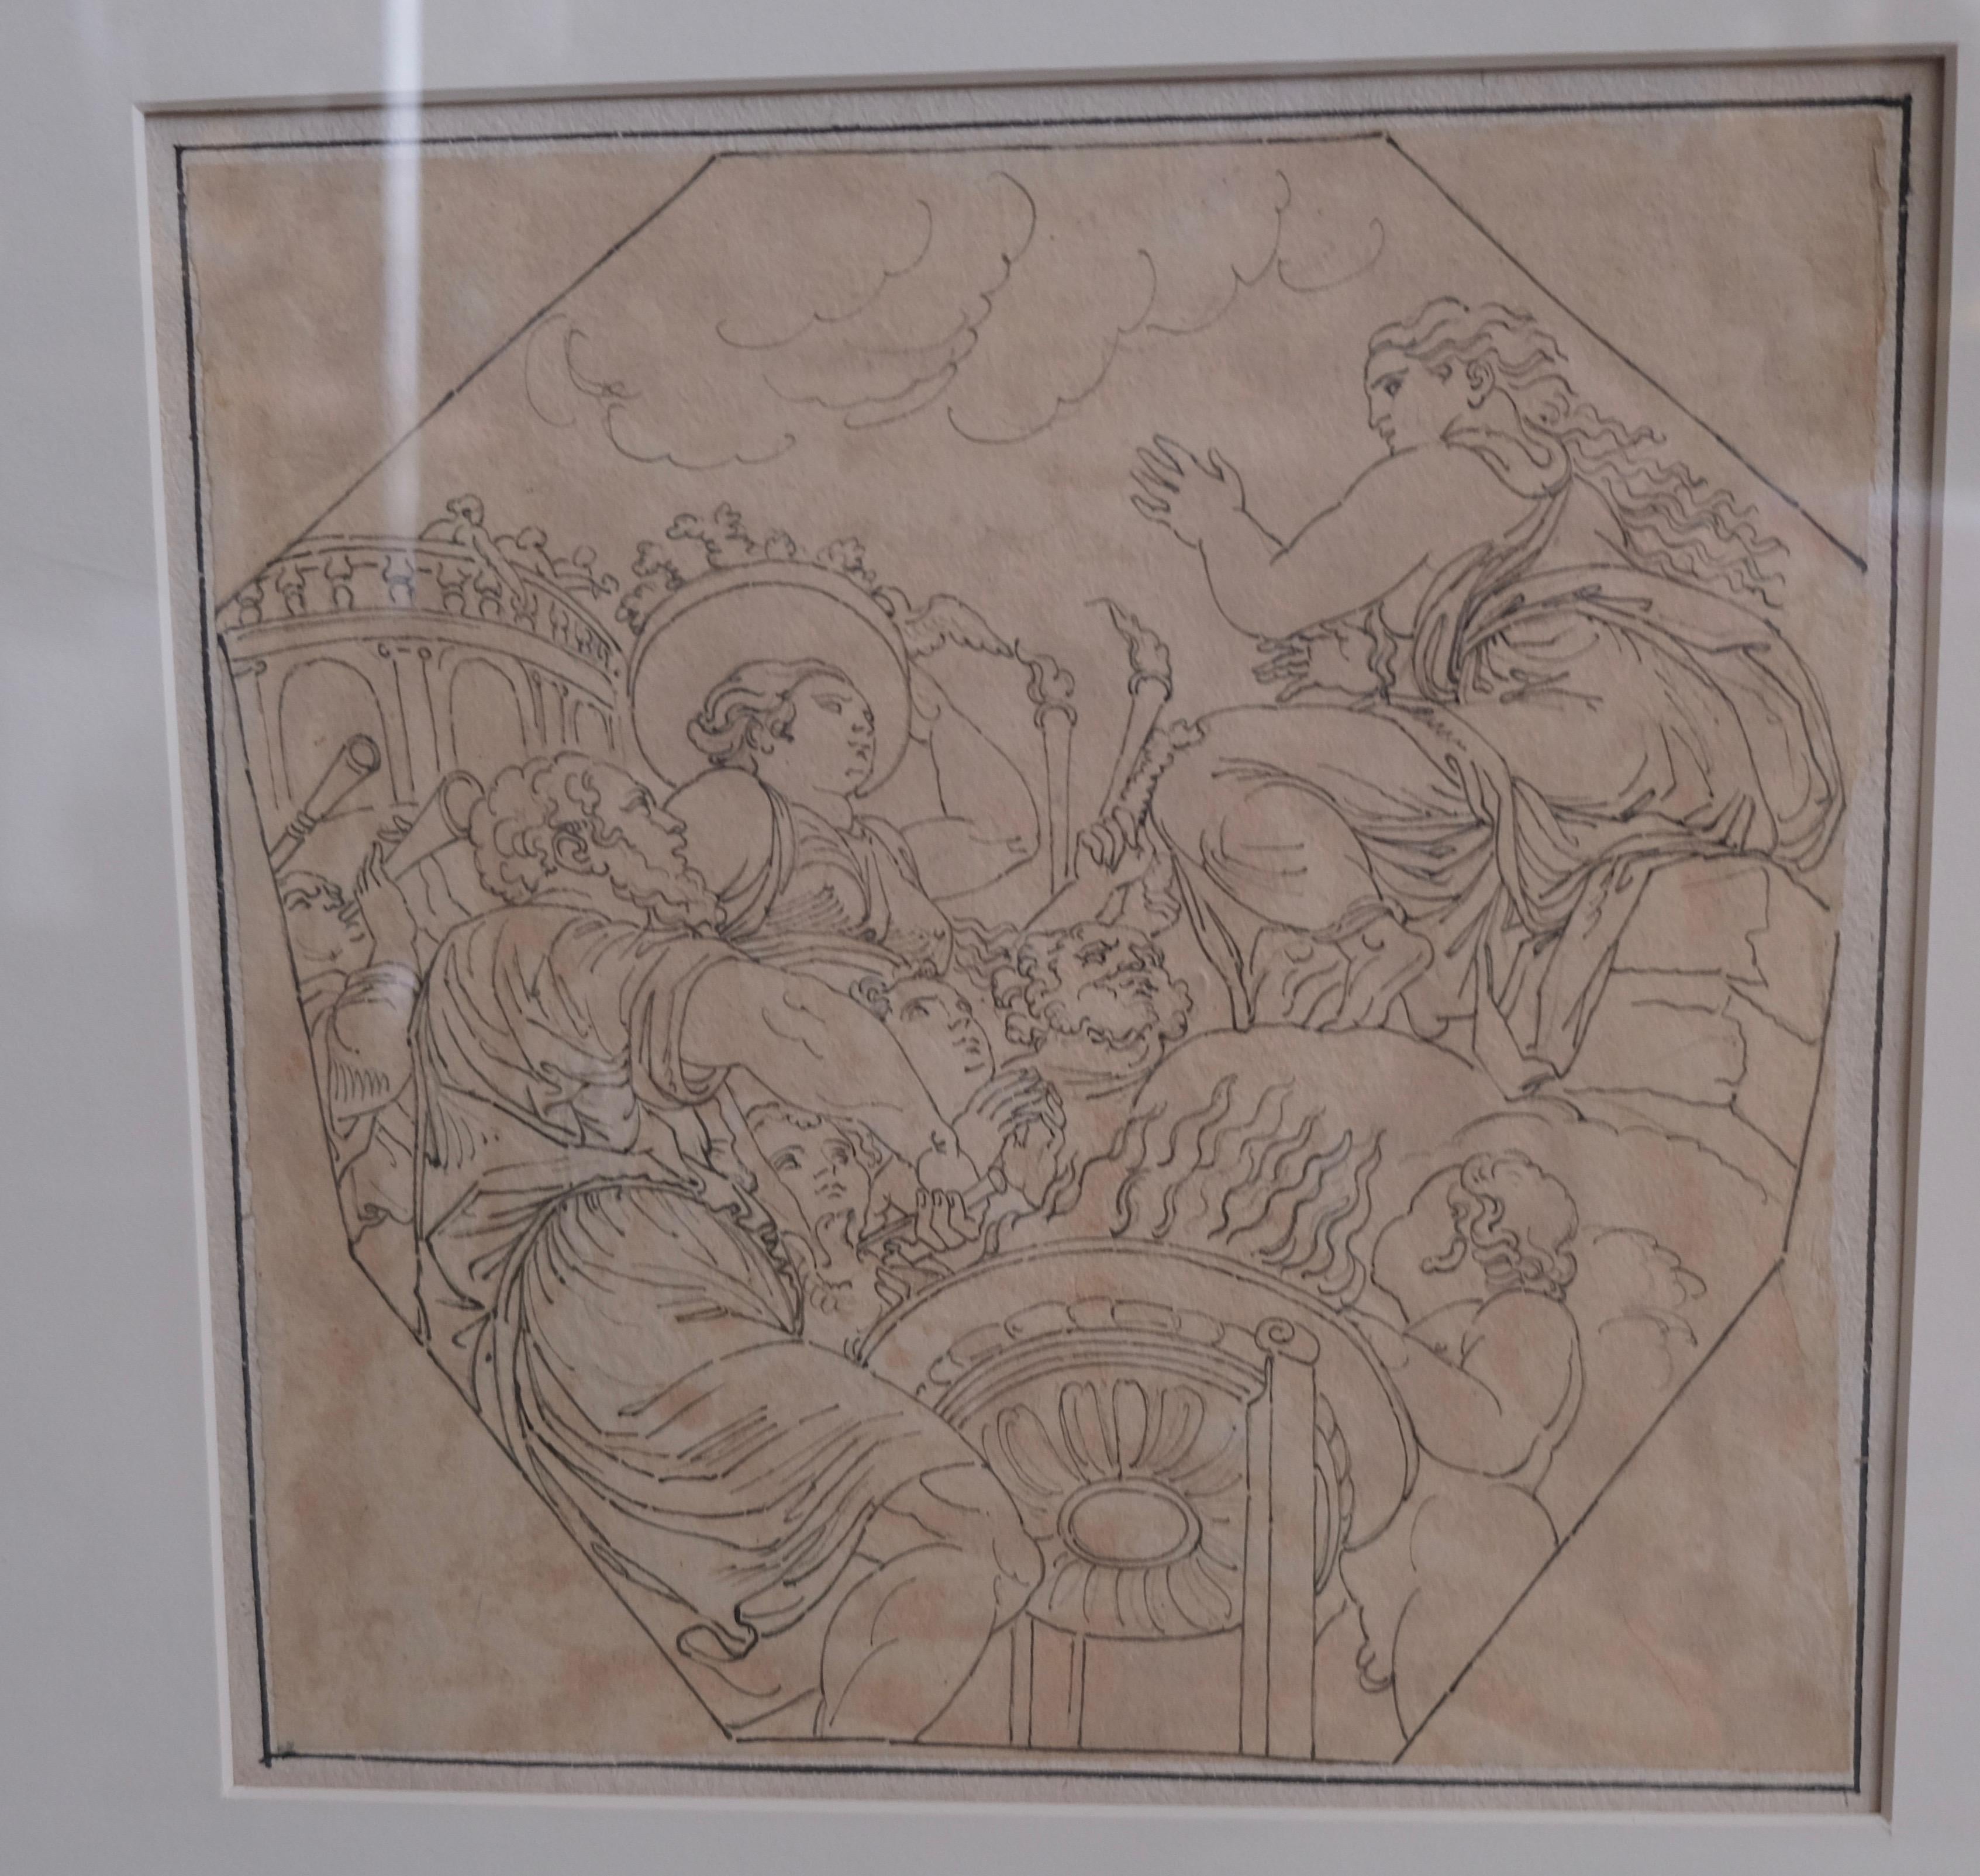 A fine drawing, ink on paper. A very decorative piece.
It is now mounted in a frame. The measurements are with frame 45×47 cm and without frame 22×22 cm.